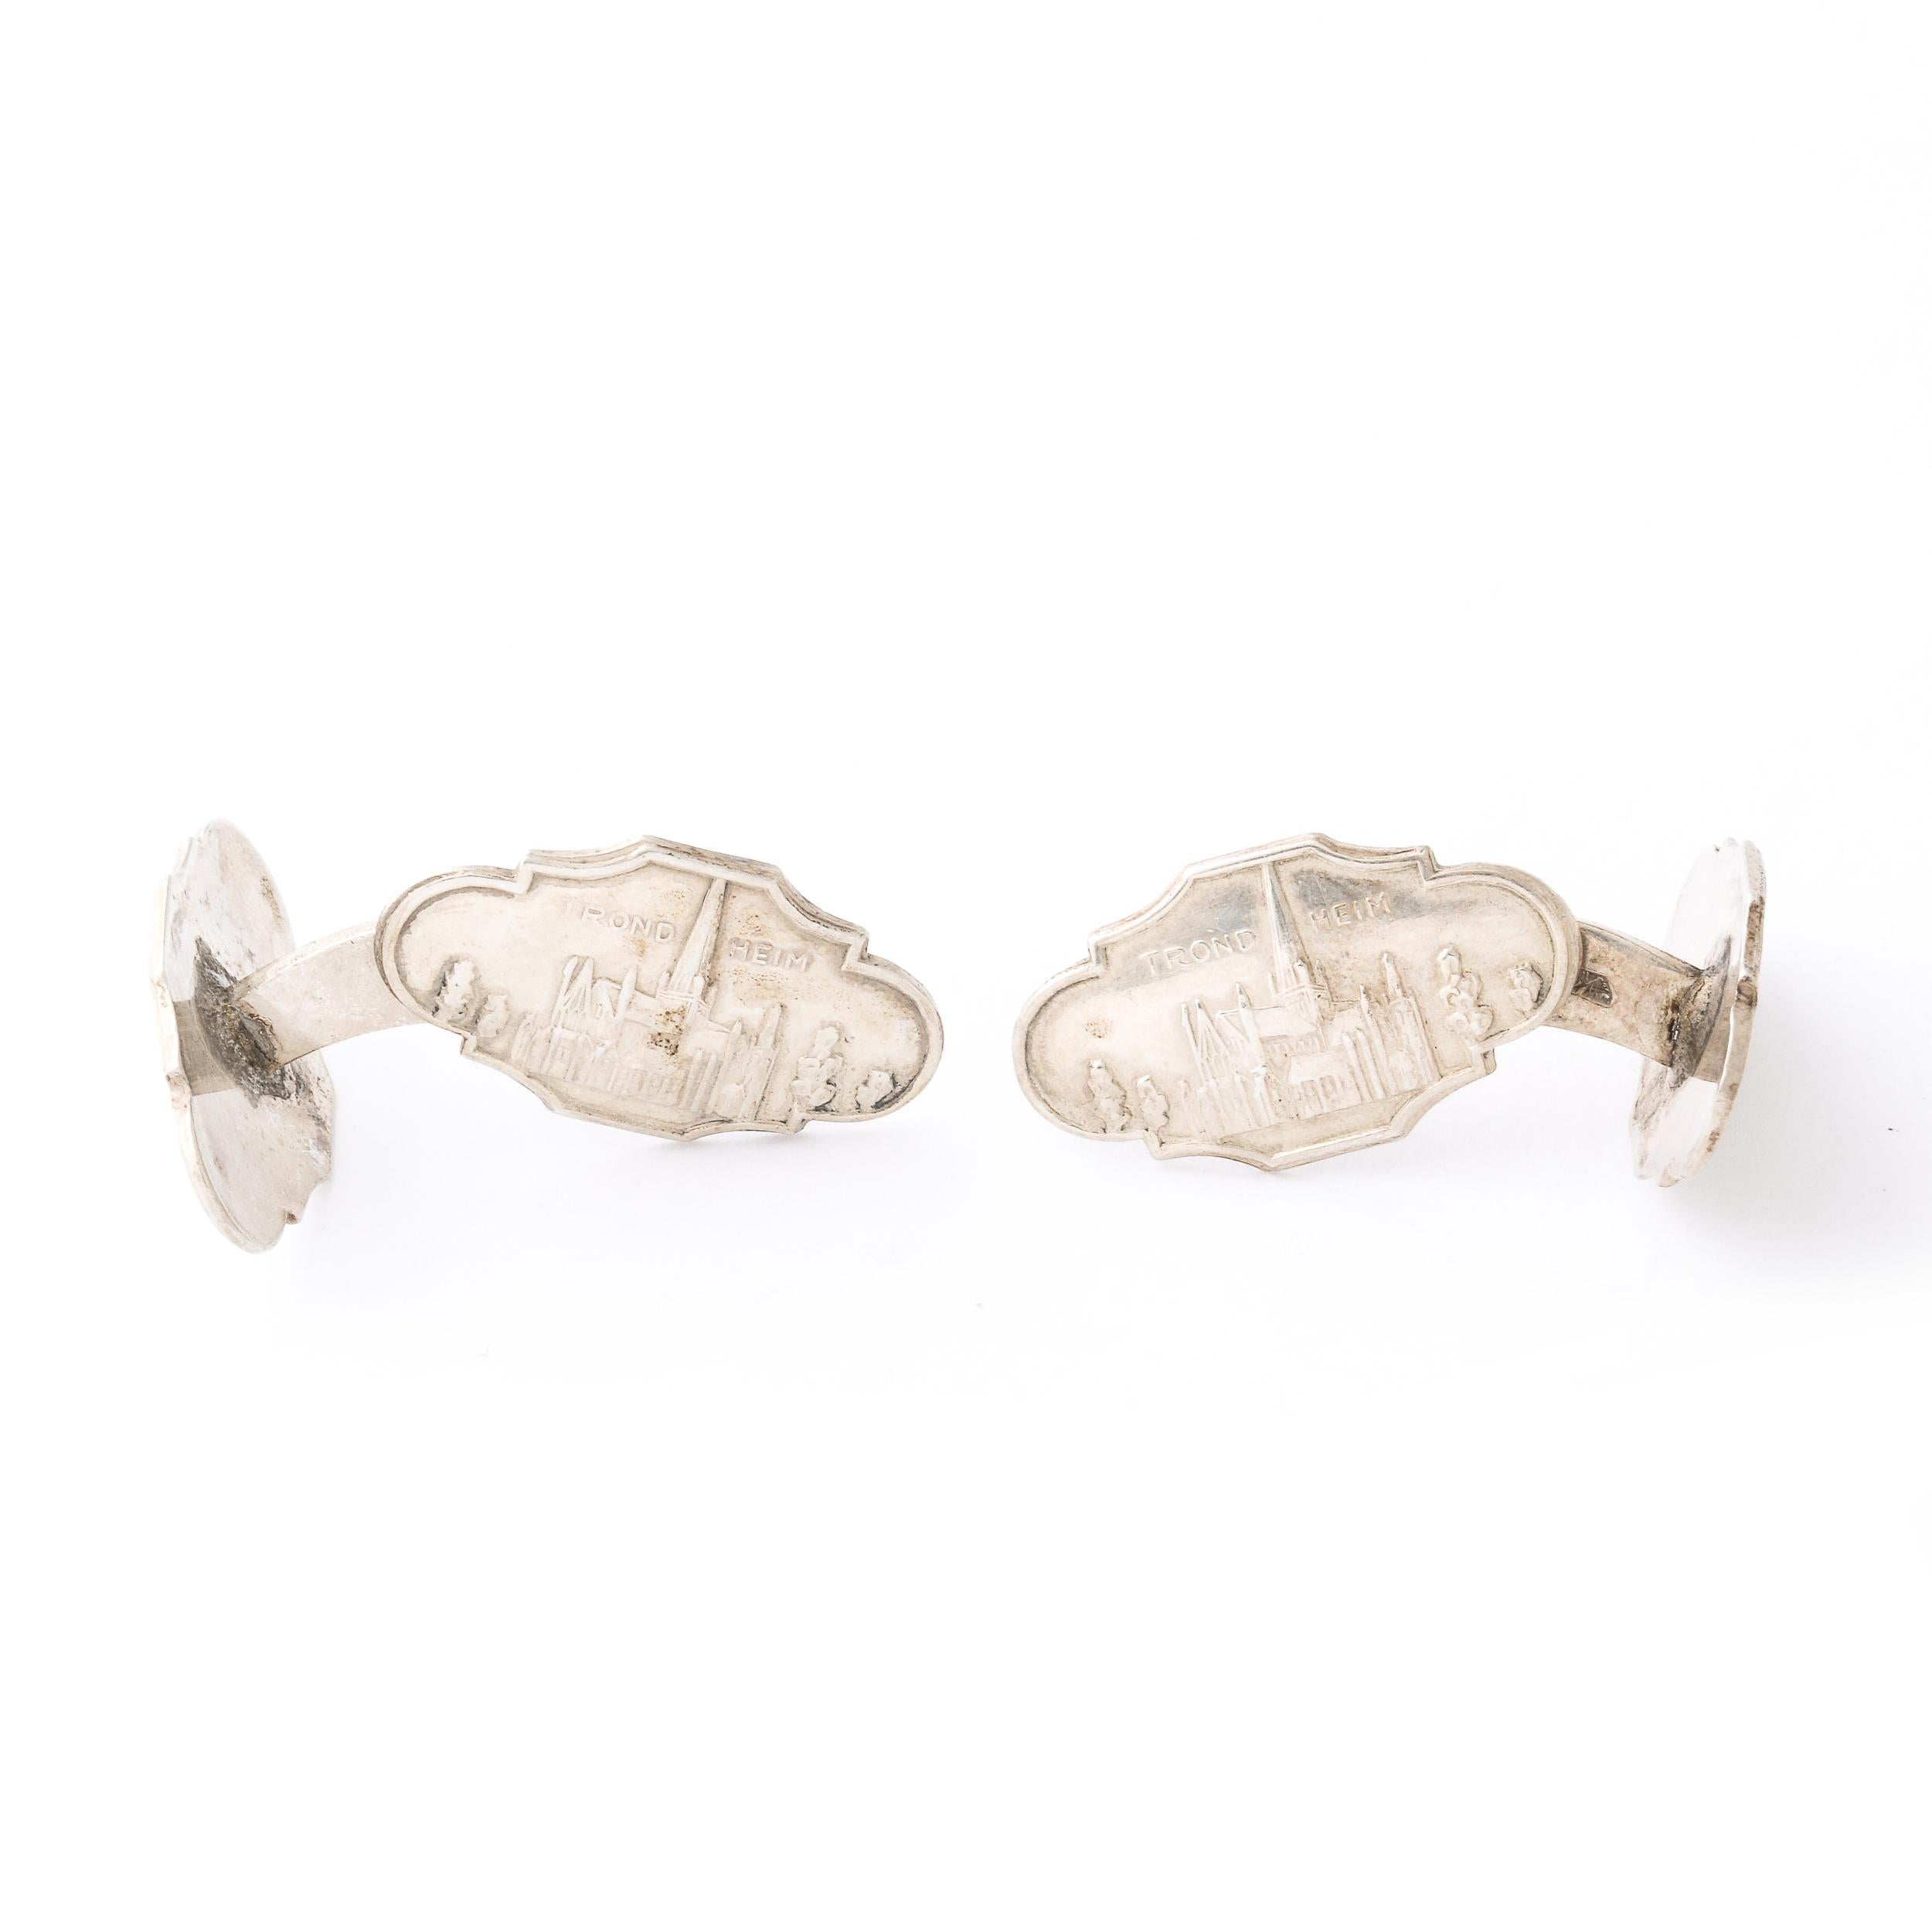 Pair of 'Trond Heim' Sterling Cufflinks W/ Landscape of Nidaros Cathedral  For Sale 8